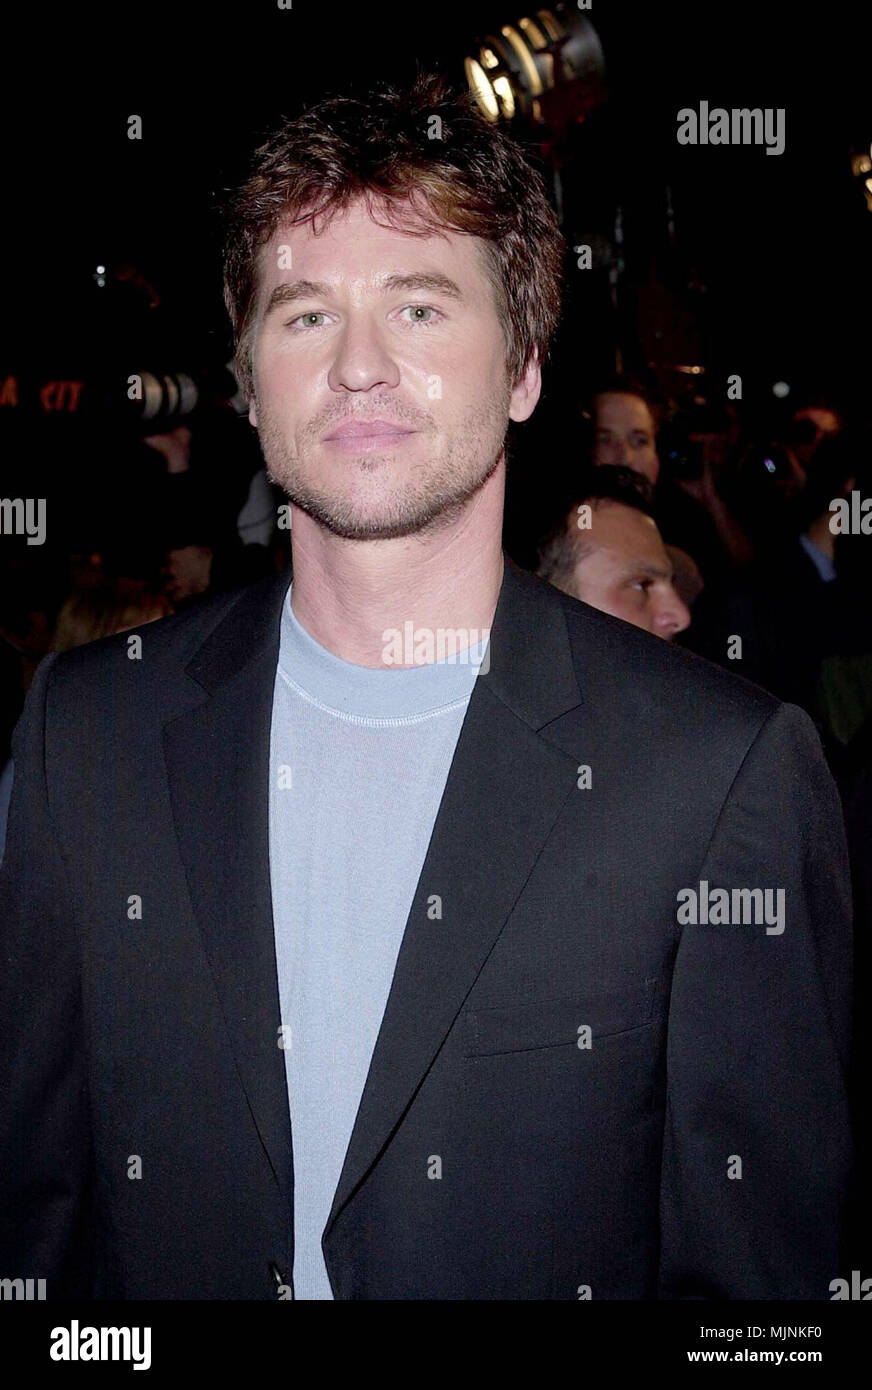 06 Nov 2000, Los Angeles, California, USA --- Original caption: Red Planet premiere was held at the Westwood Village Theatre in Los Angeles. --- ' Tsuni / - 'Val Kilmer    Val Kilmer    one person, Vertical, Best of, Hollywood Life, Event in Hollywood Life - California,  Red Carpet Event, Vertical, USA, Film Industry, Celebrities,  Photography, Bestof, Arts Culture and Entertainment, , , Topix Stock Photo